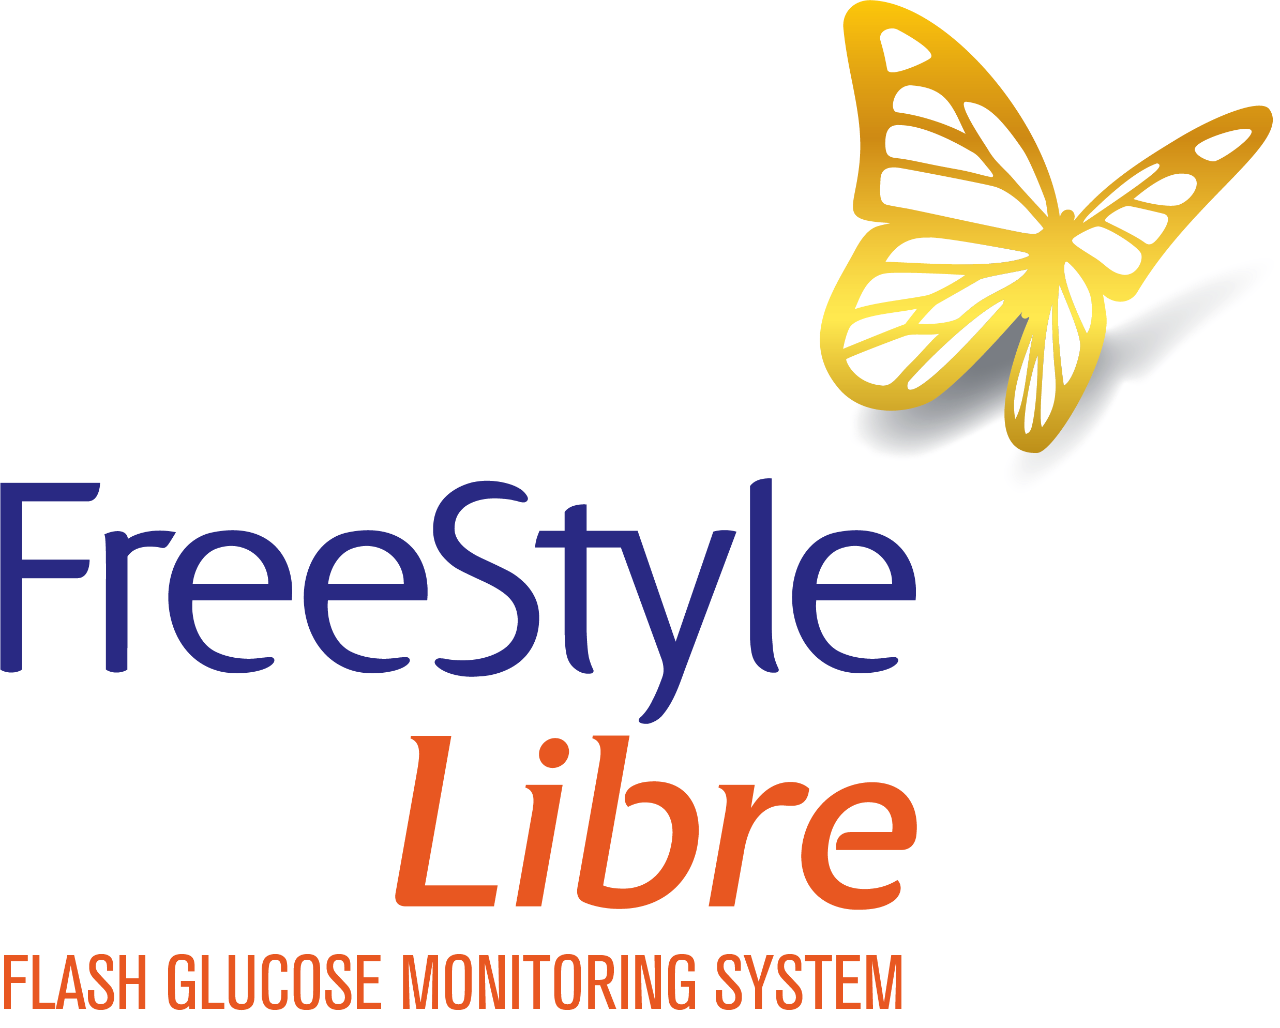 FreeStyle Libre, Flash glucose monitoring system